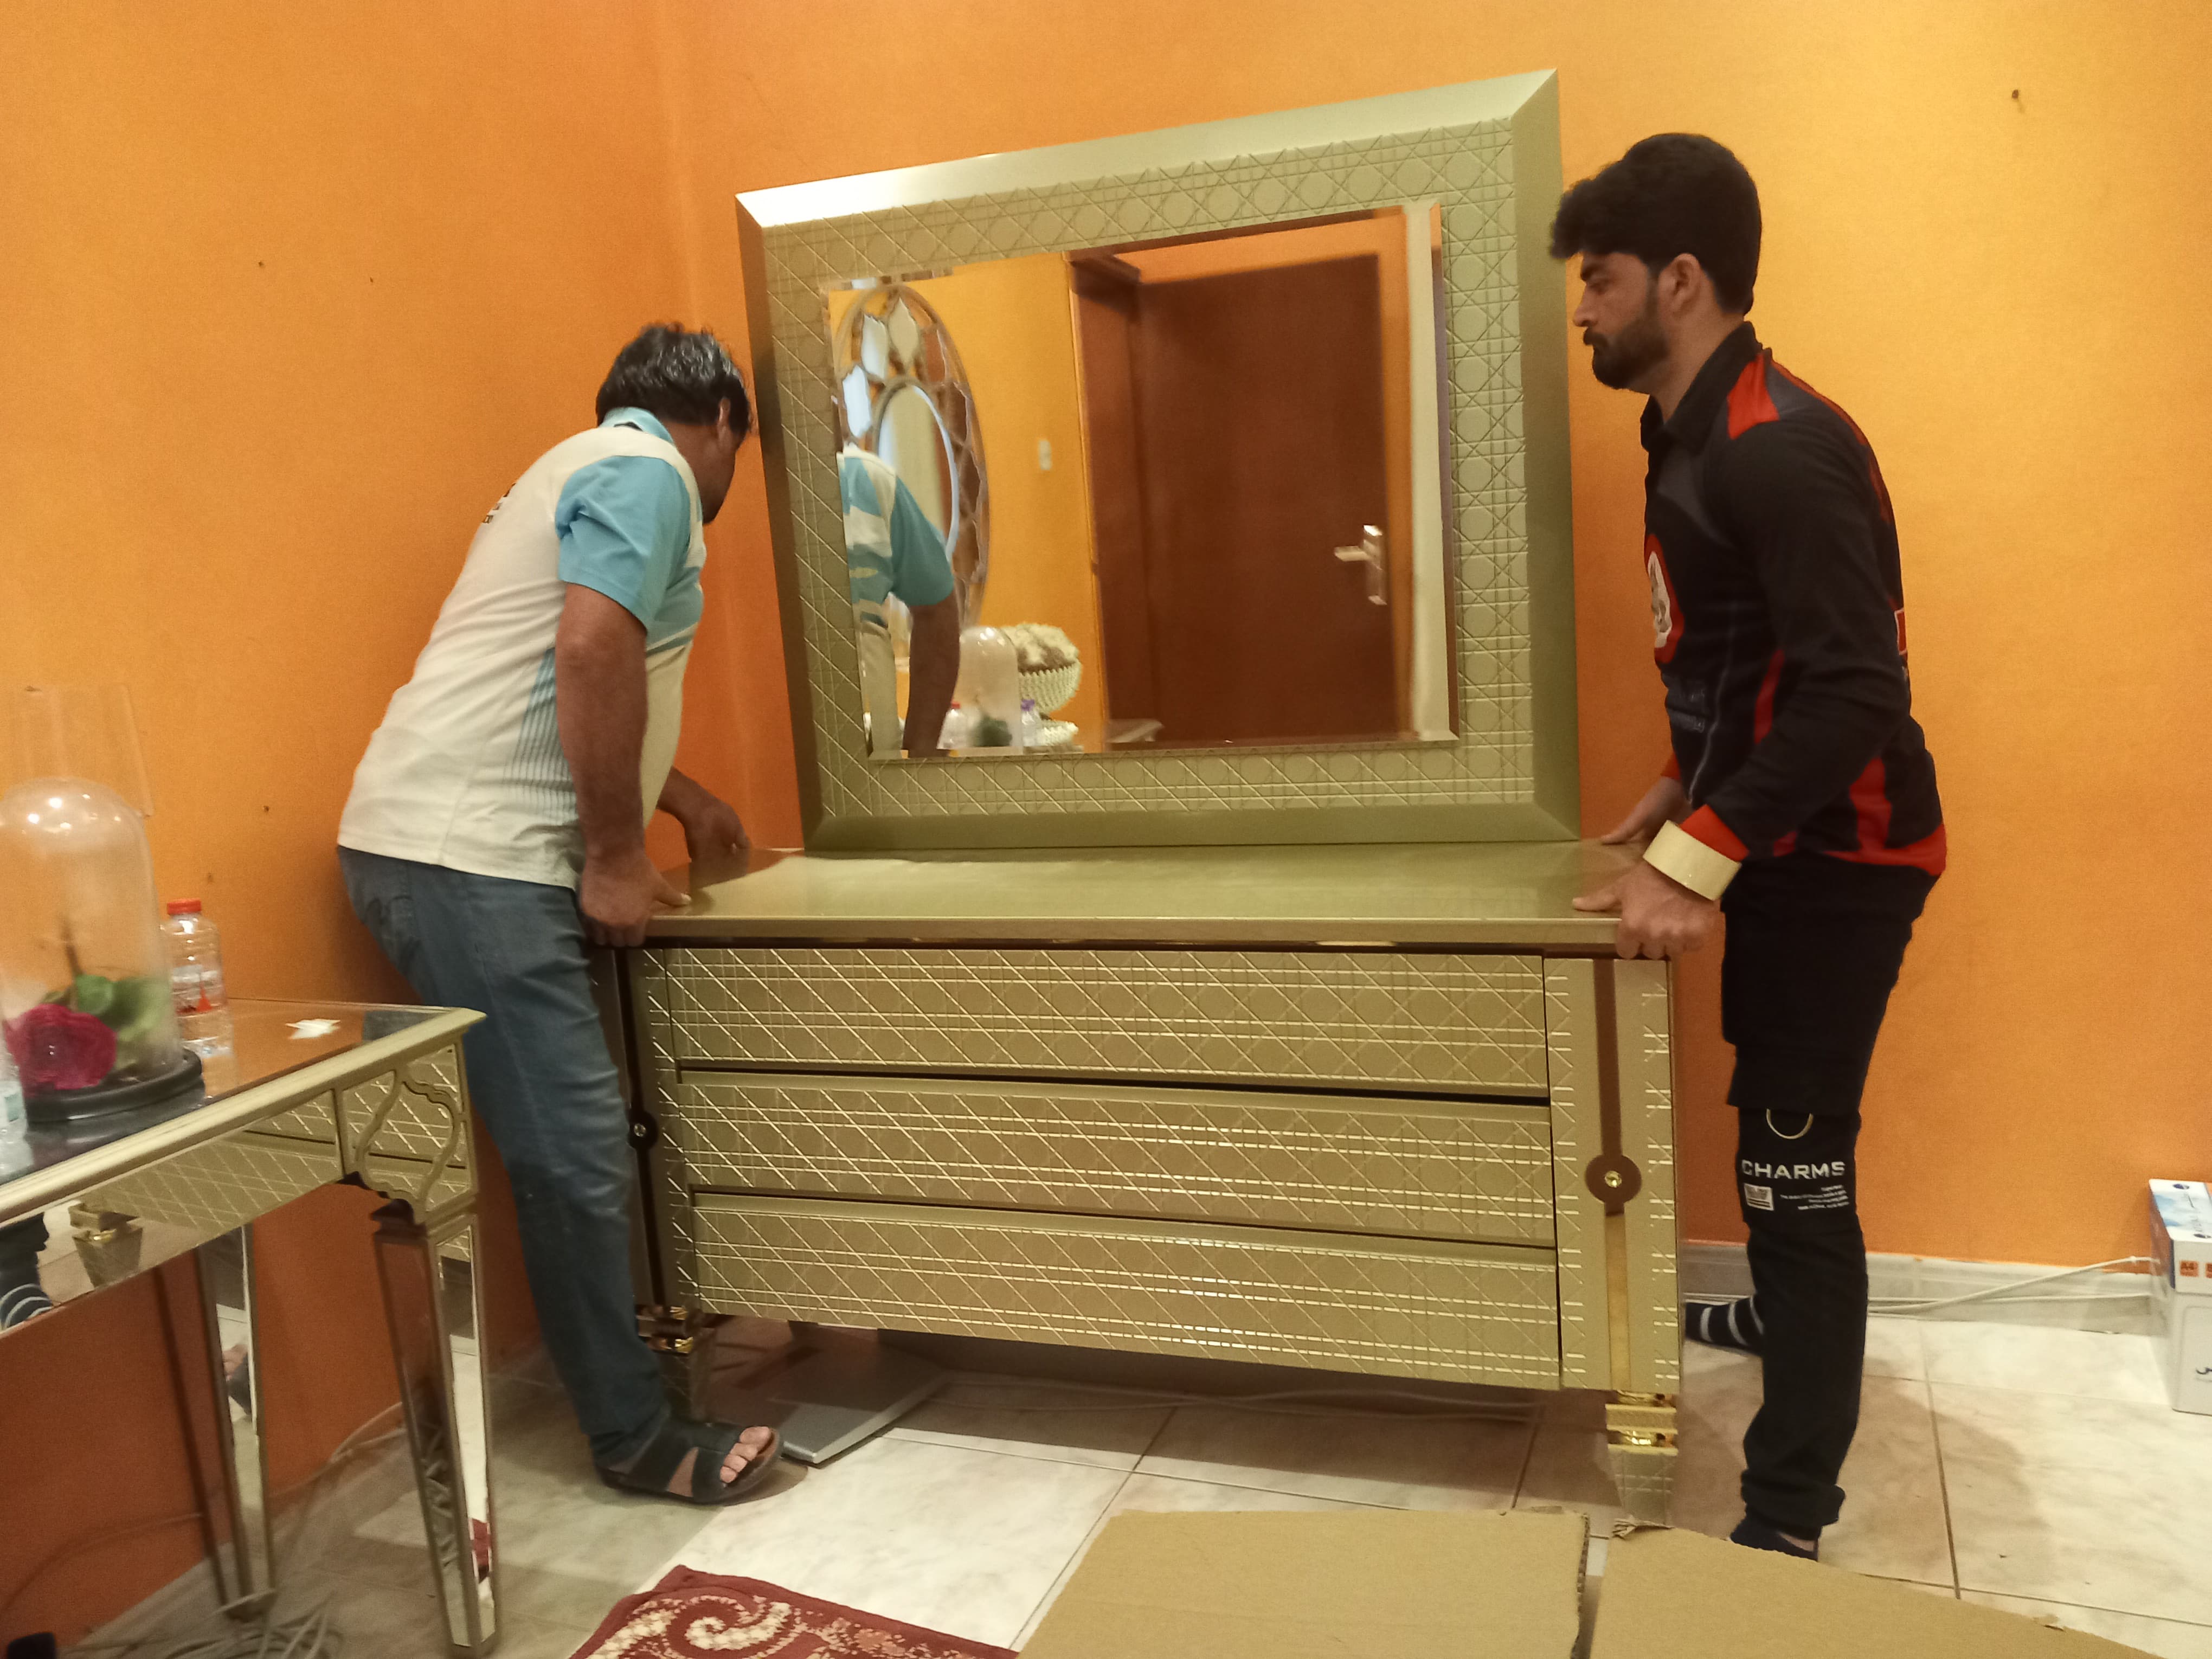 Movers in Ajman